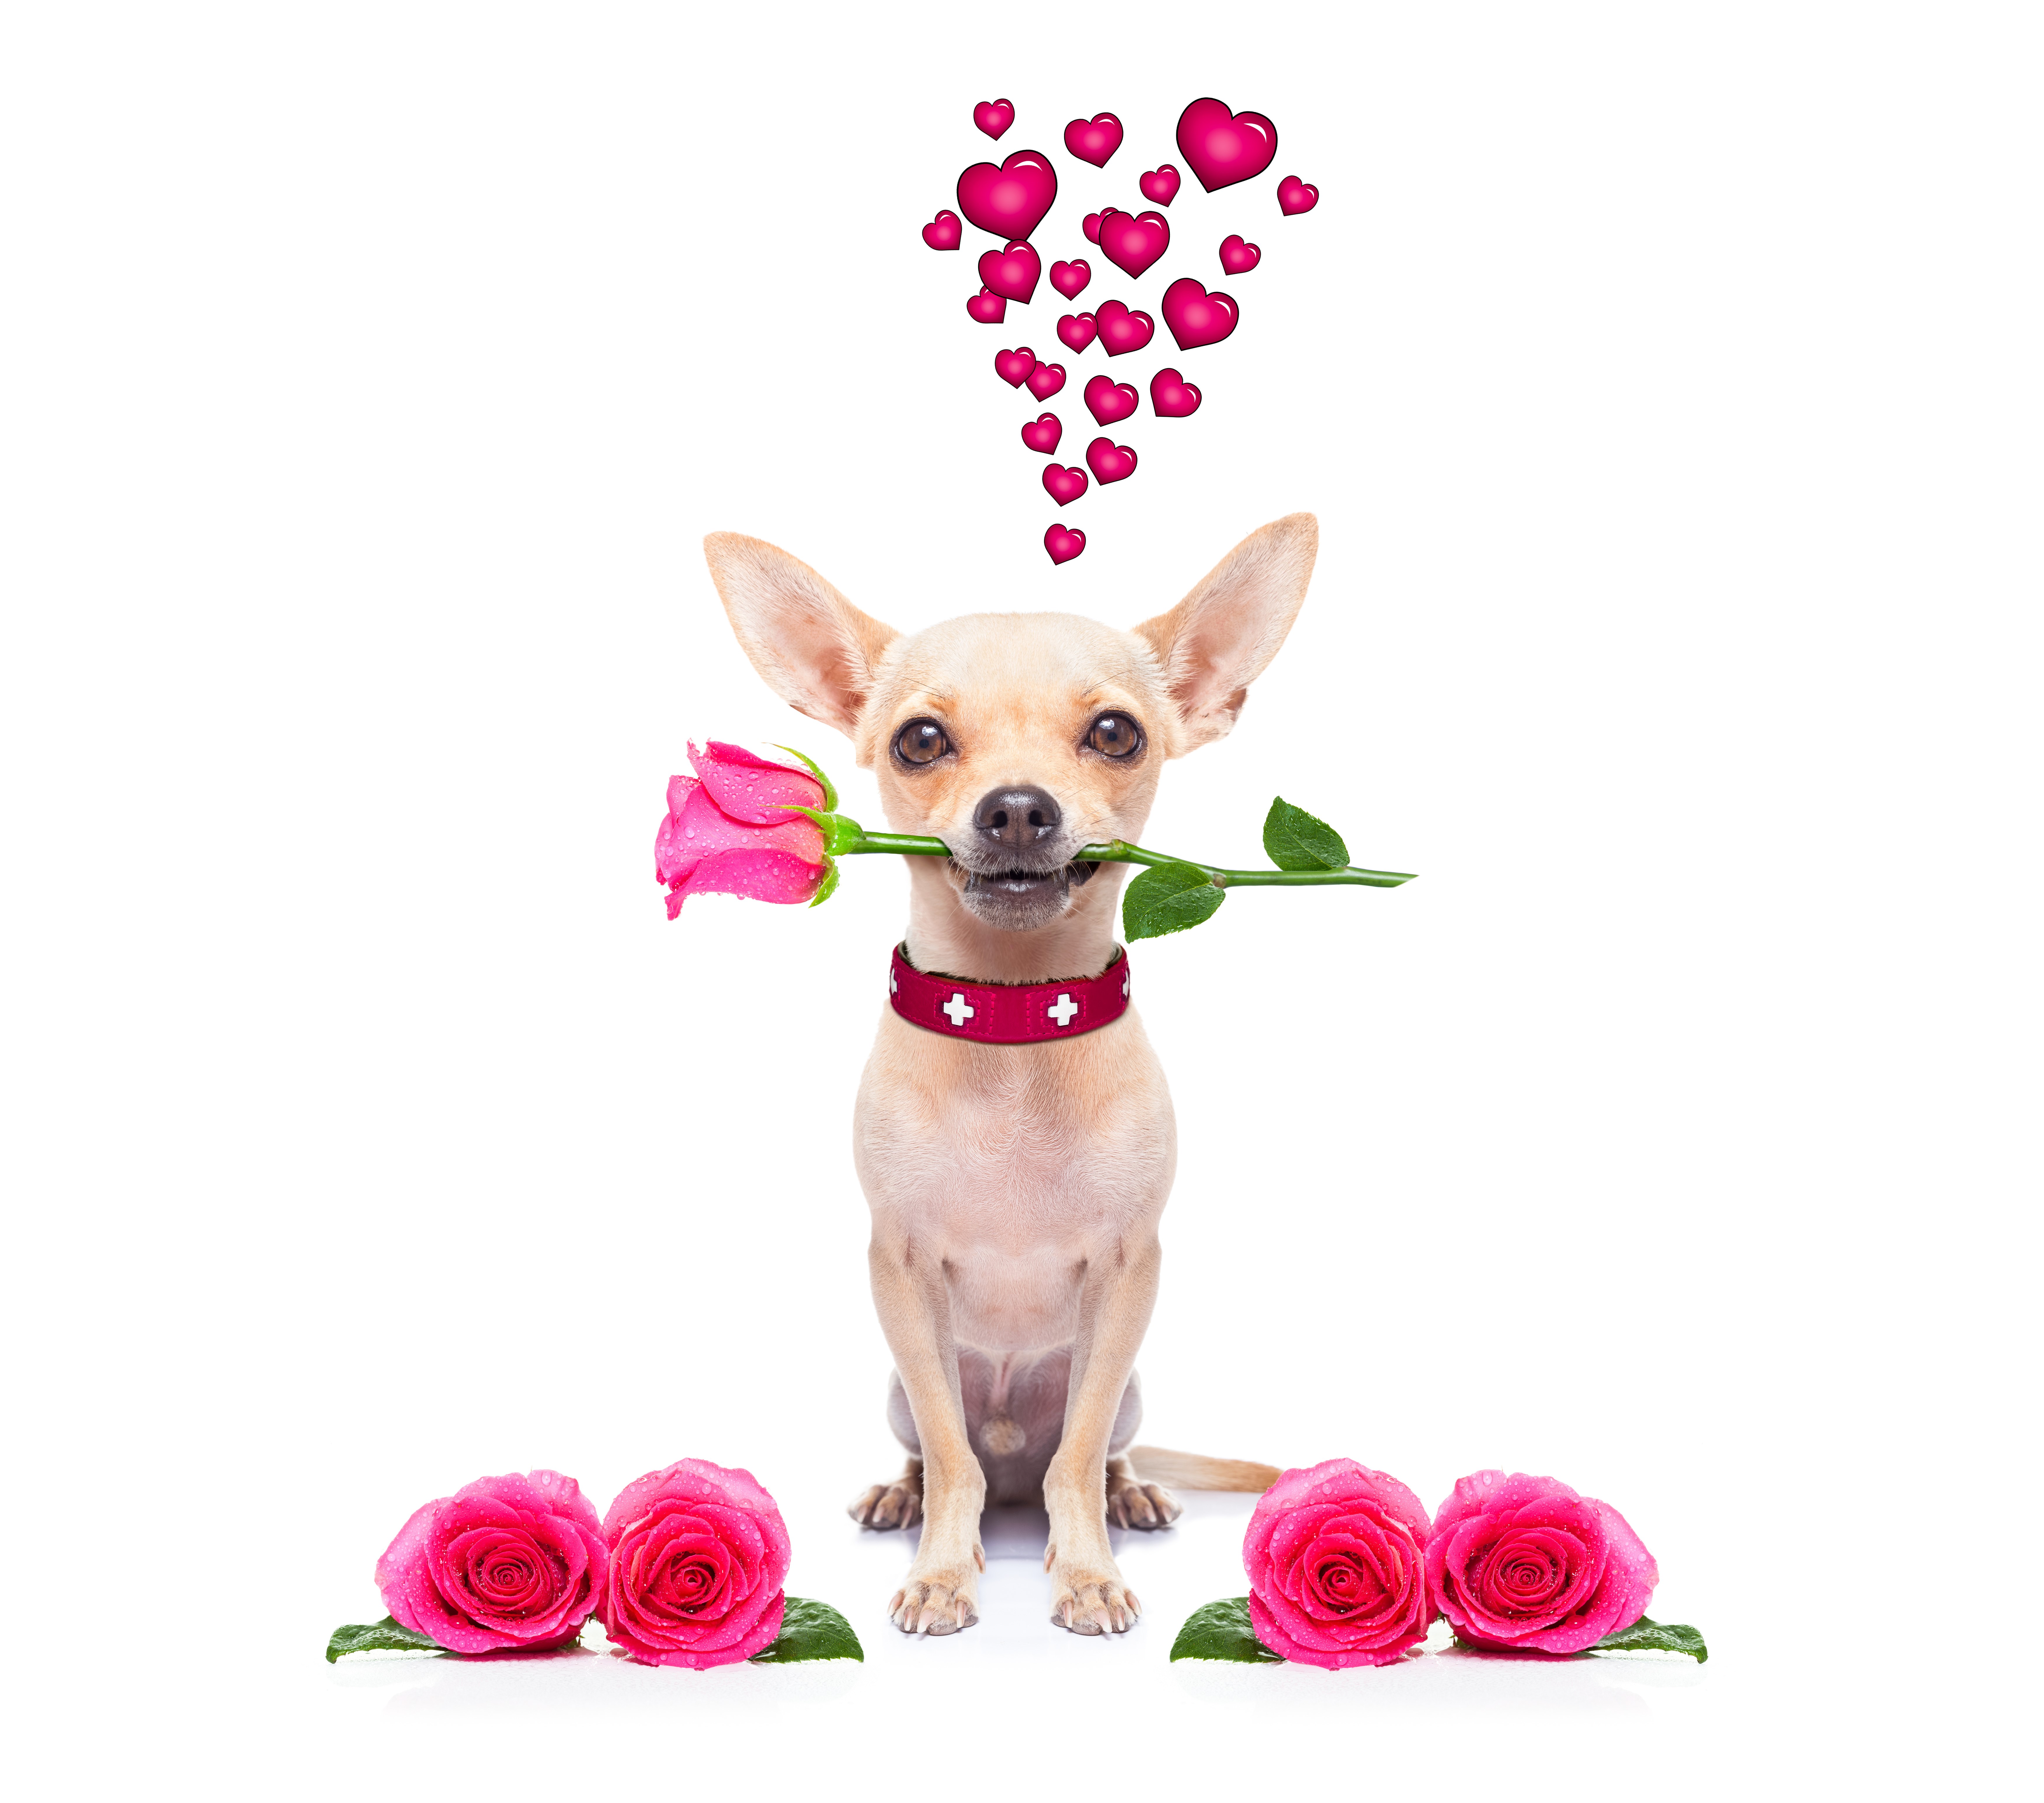 4K, 5K, 6K, 7K, Valentine's Day, Dogs, Roses, Chihuahua, Heart, Pink color Gallery HD Wallpaper